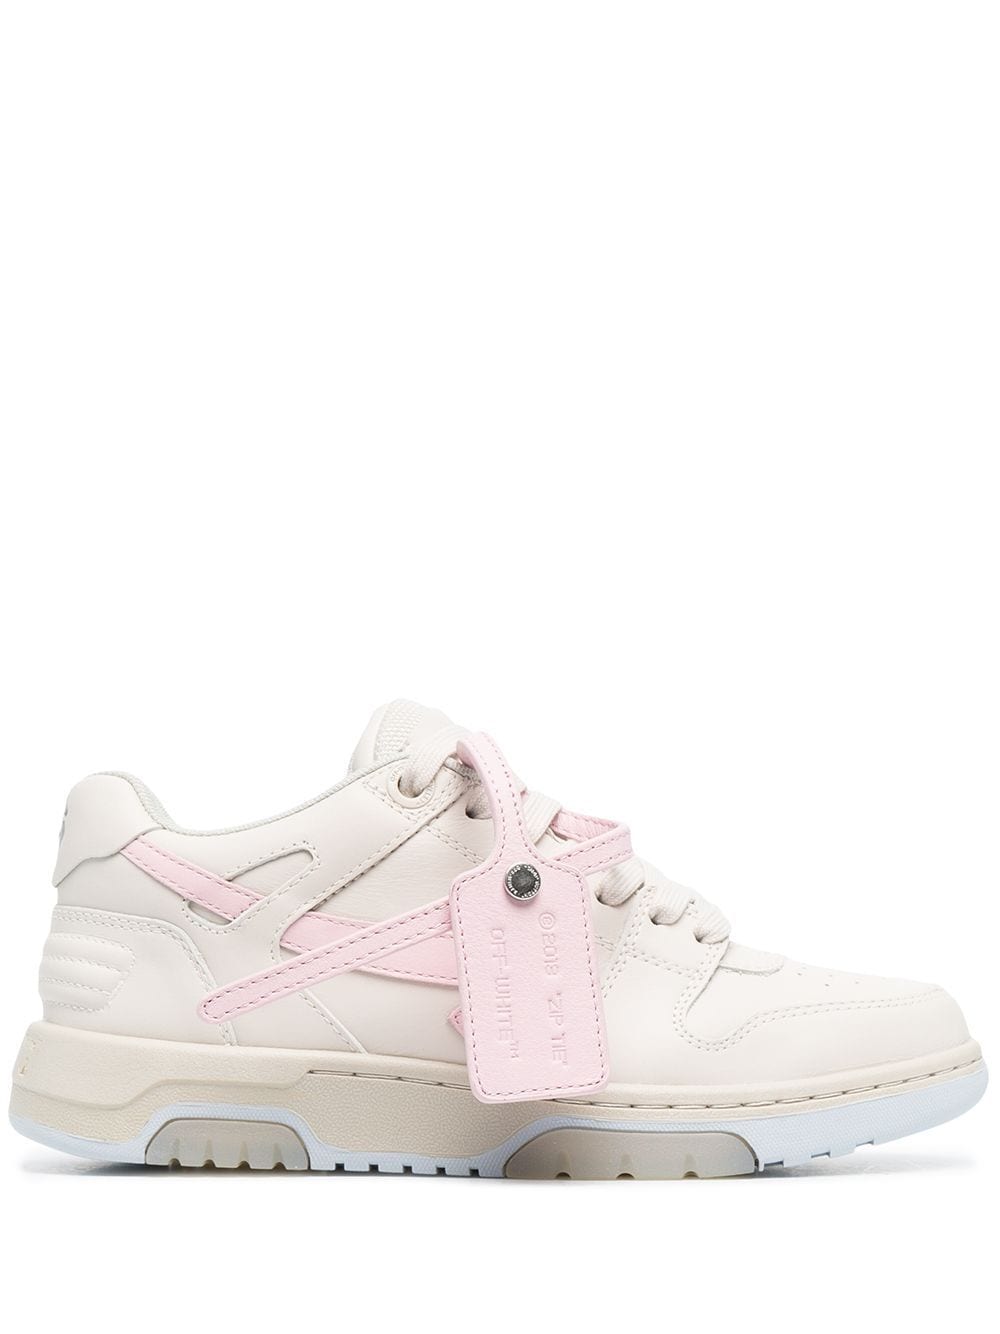 OFF WHITE - OUT OF OFFICE BEIGE PINK